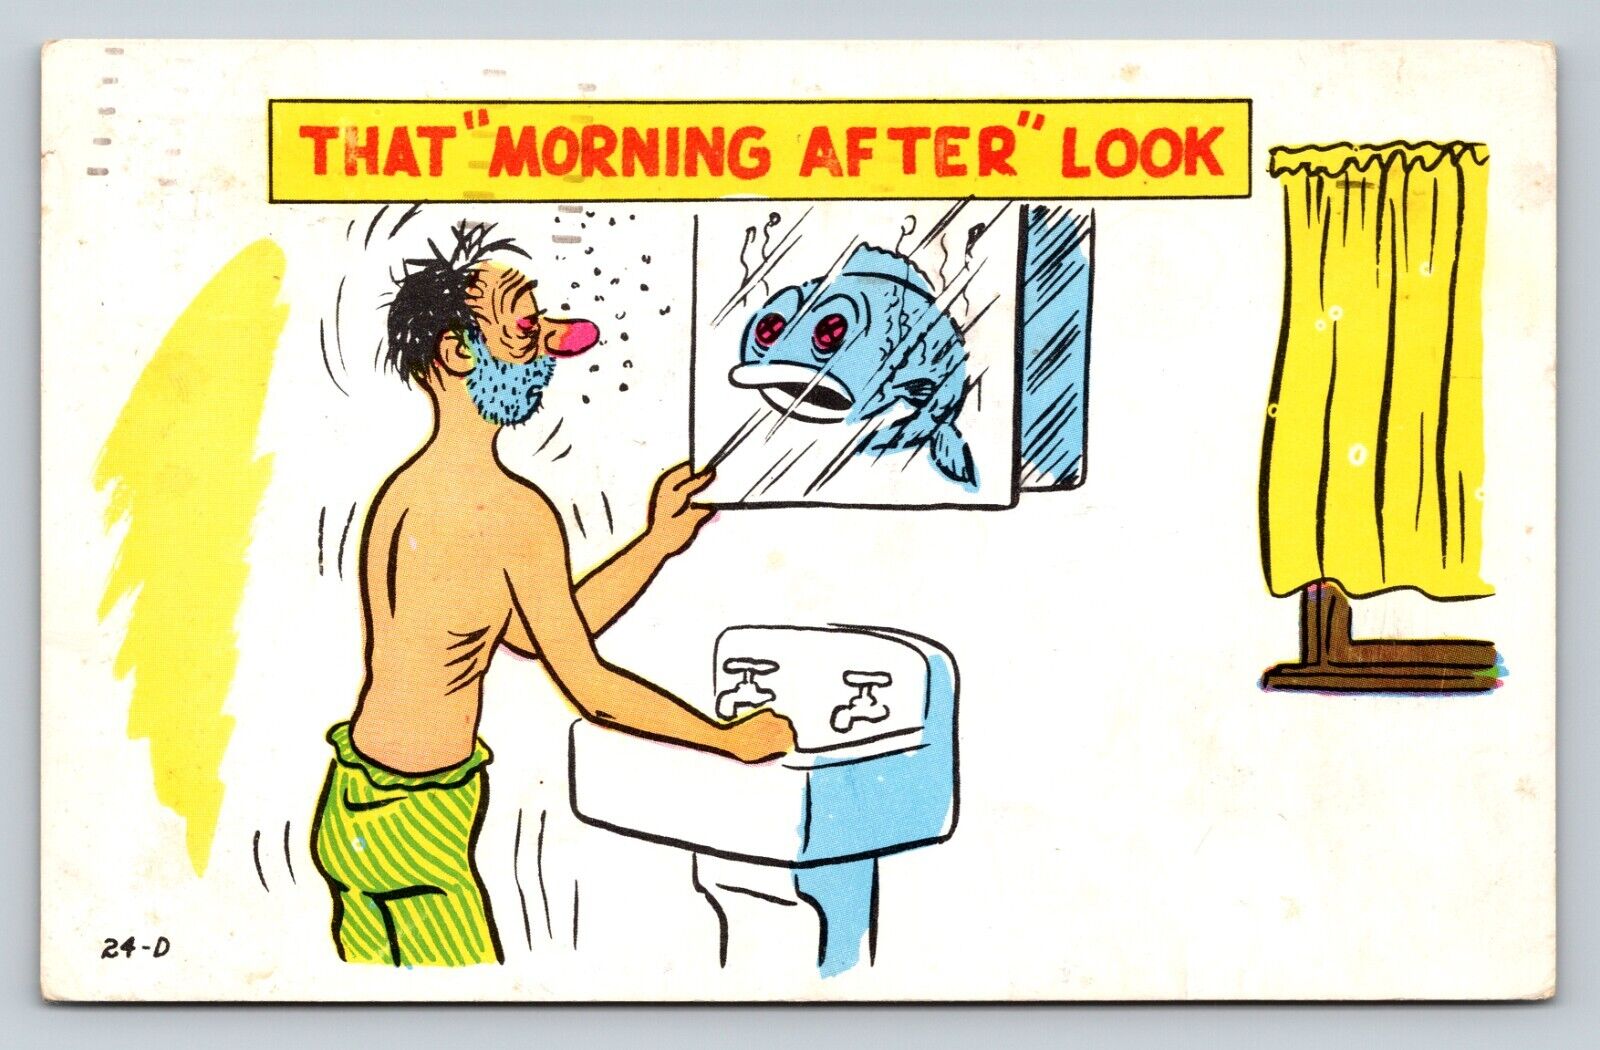 c1955 Morning After Look VINTAGE Postcard 6c Air Mail 0786